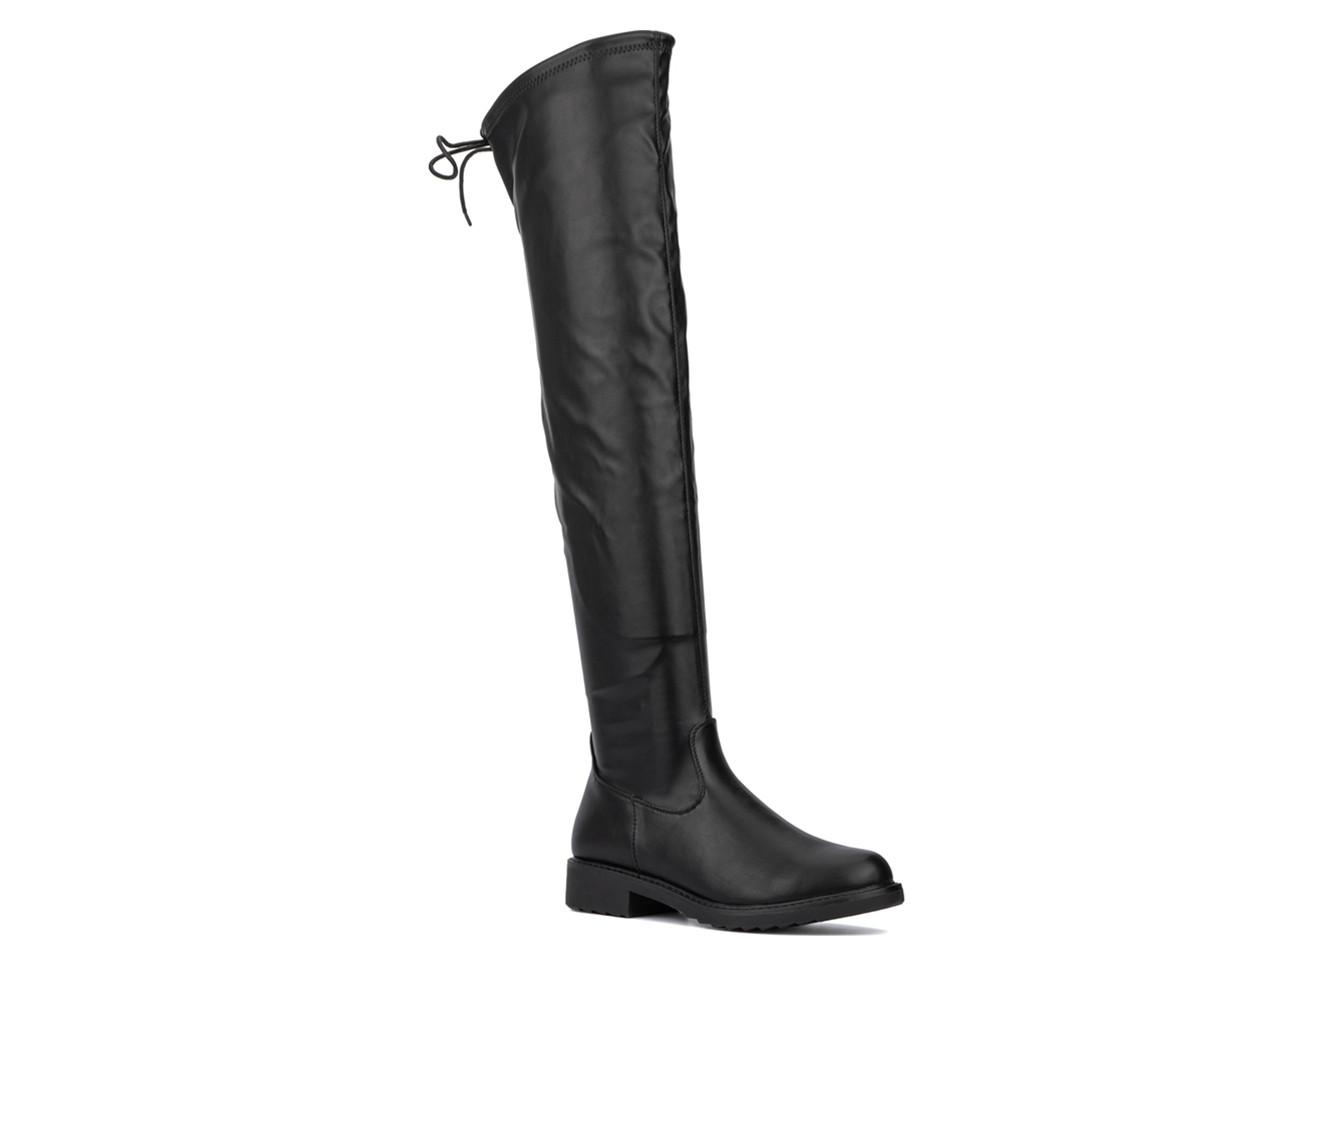 Women's New York and Company Ulla Knee High Boots